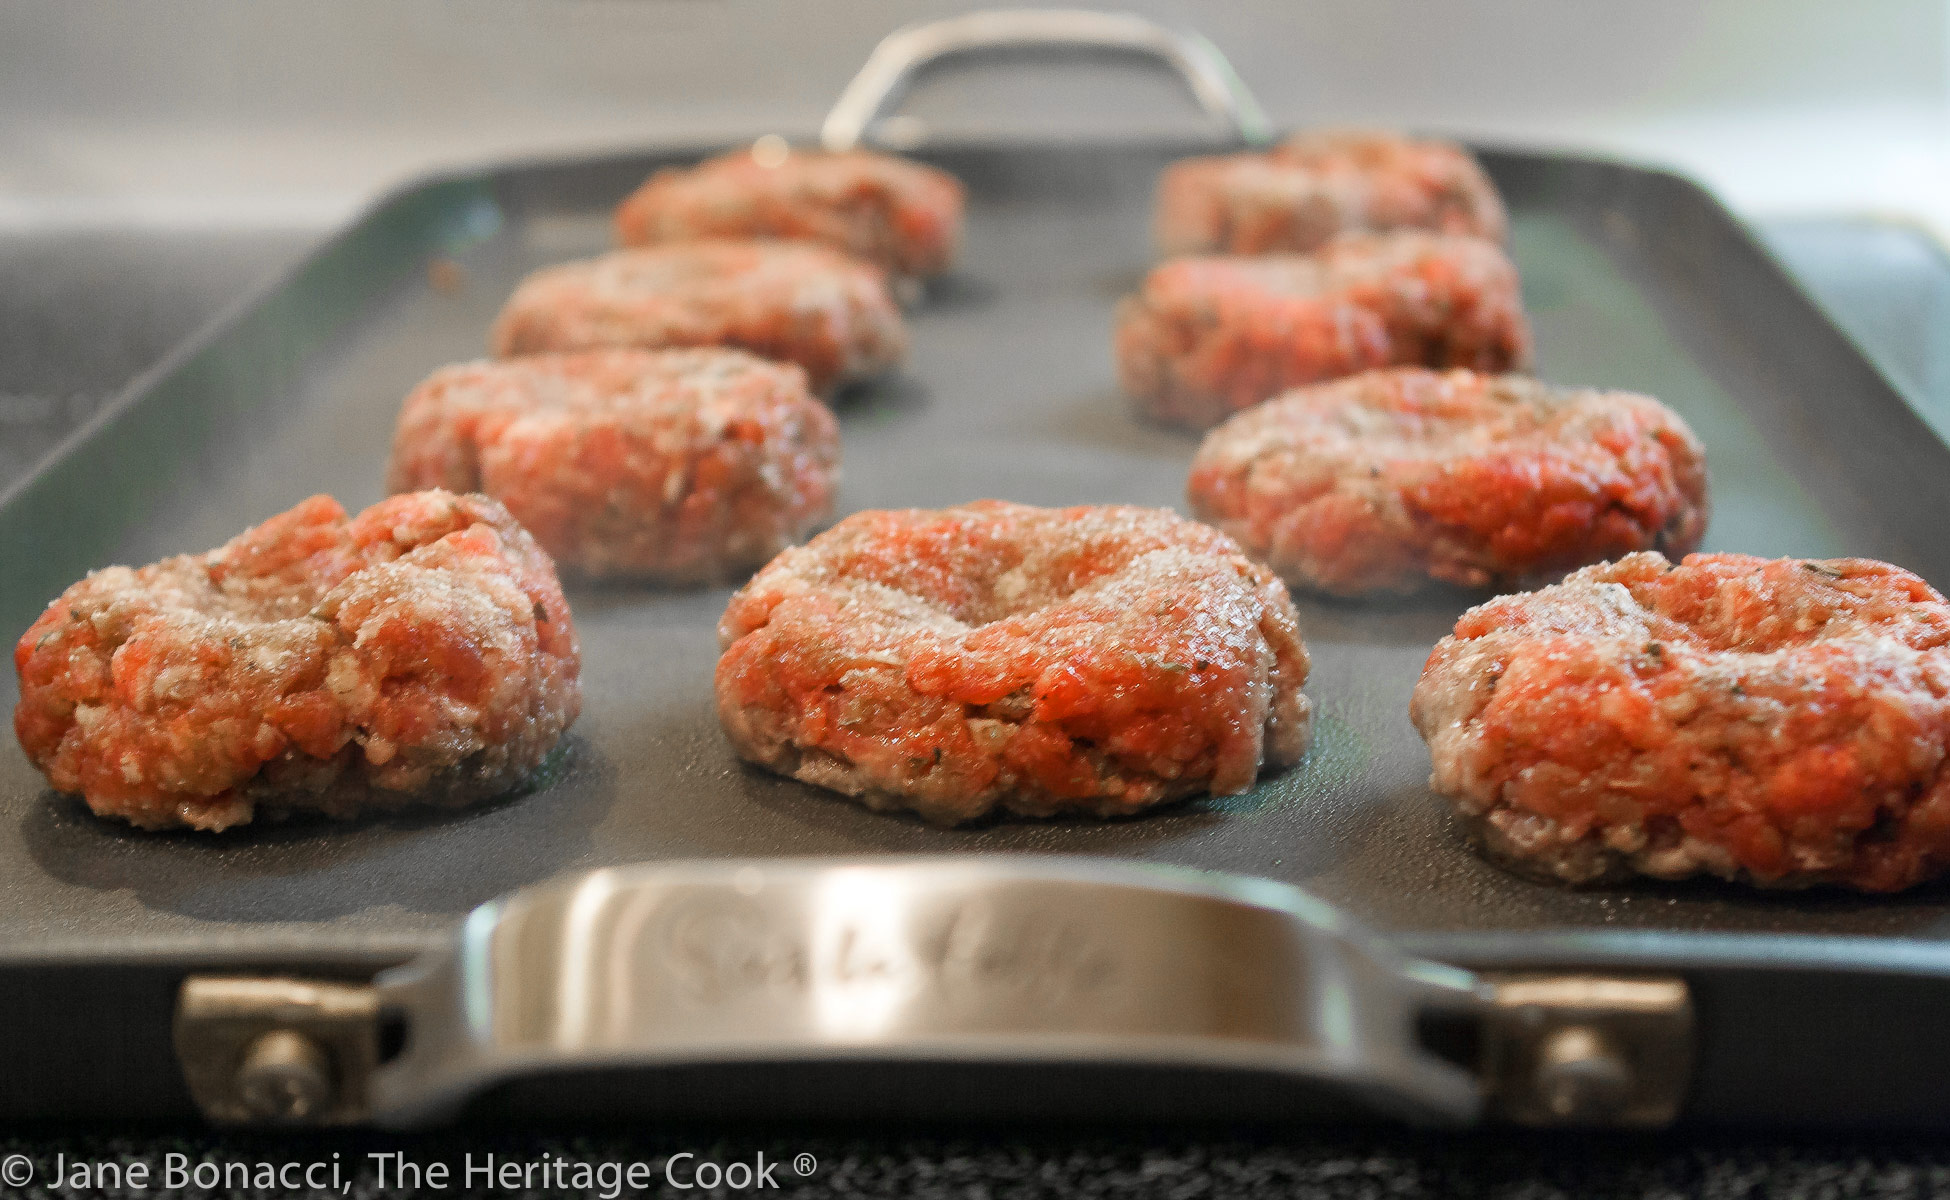 The divot in the burgers helps keep them from bulging as they cook!